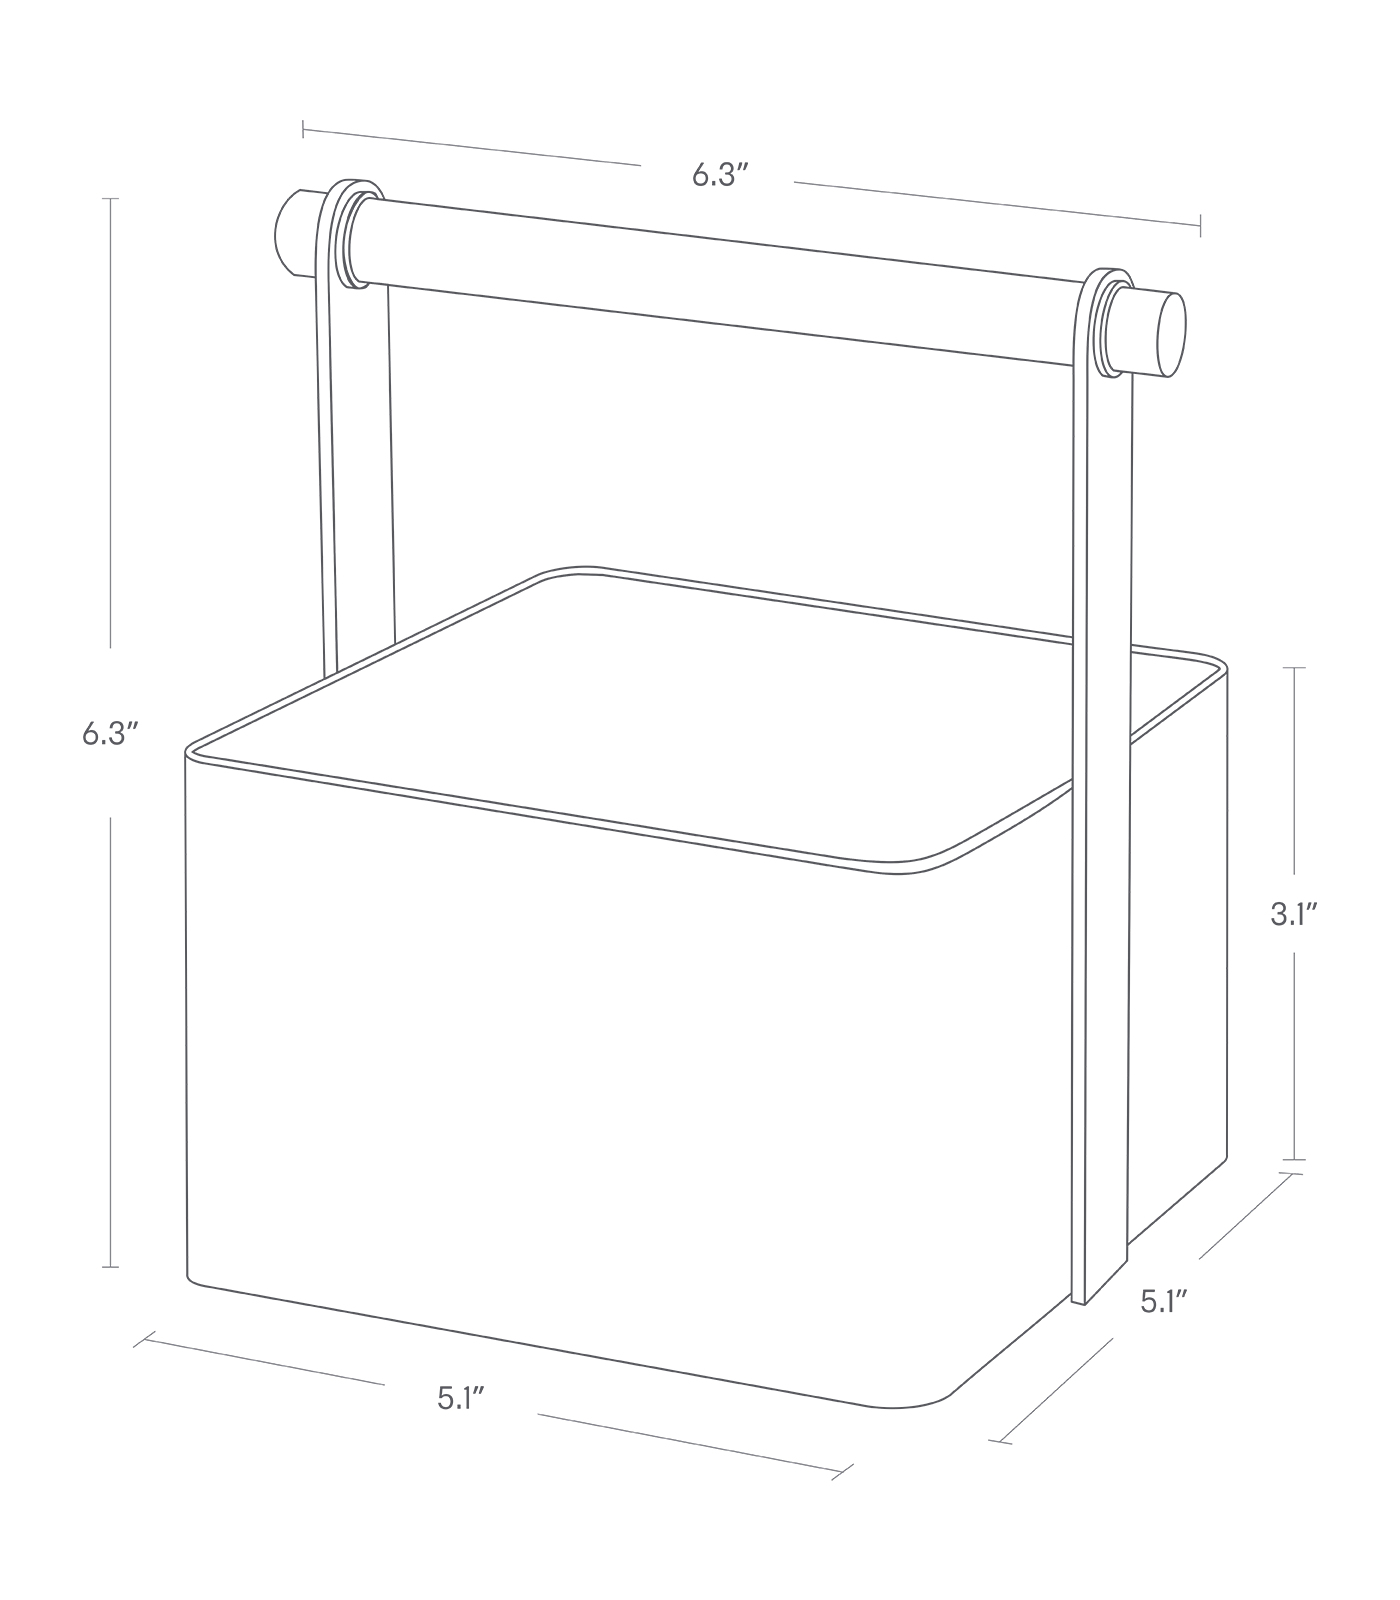 Dimension image for Storage Caddy - 2 Sizes on a white background including dimensions  L 5.12 x W 6.3 x H 6.3 inches